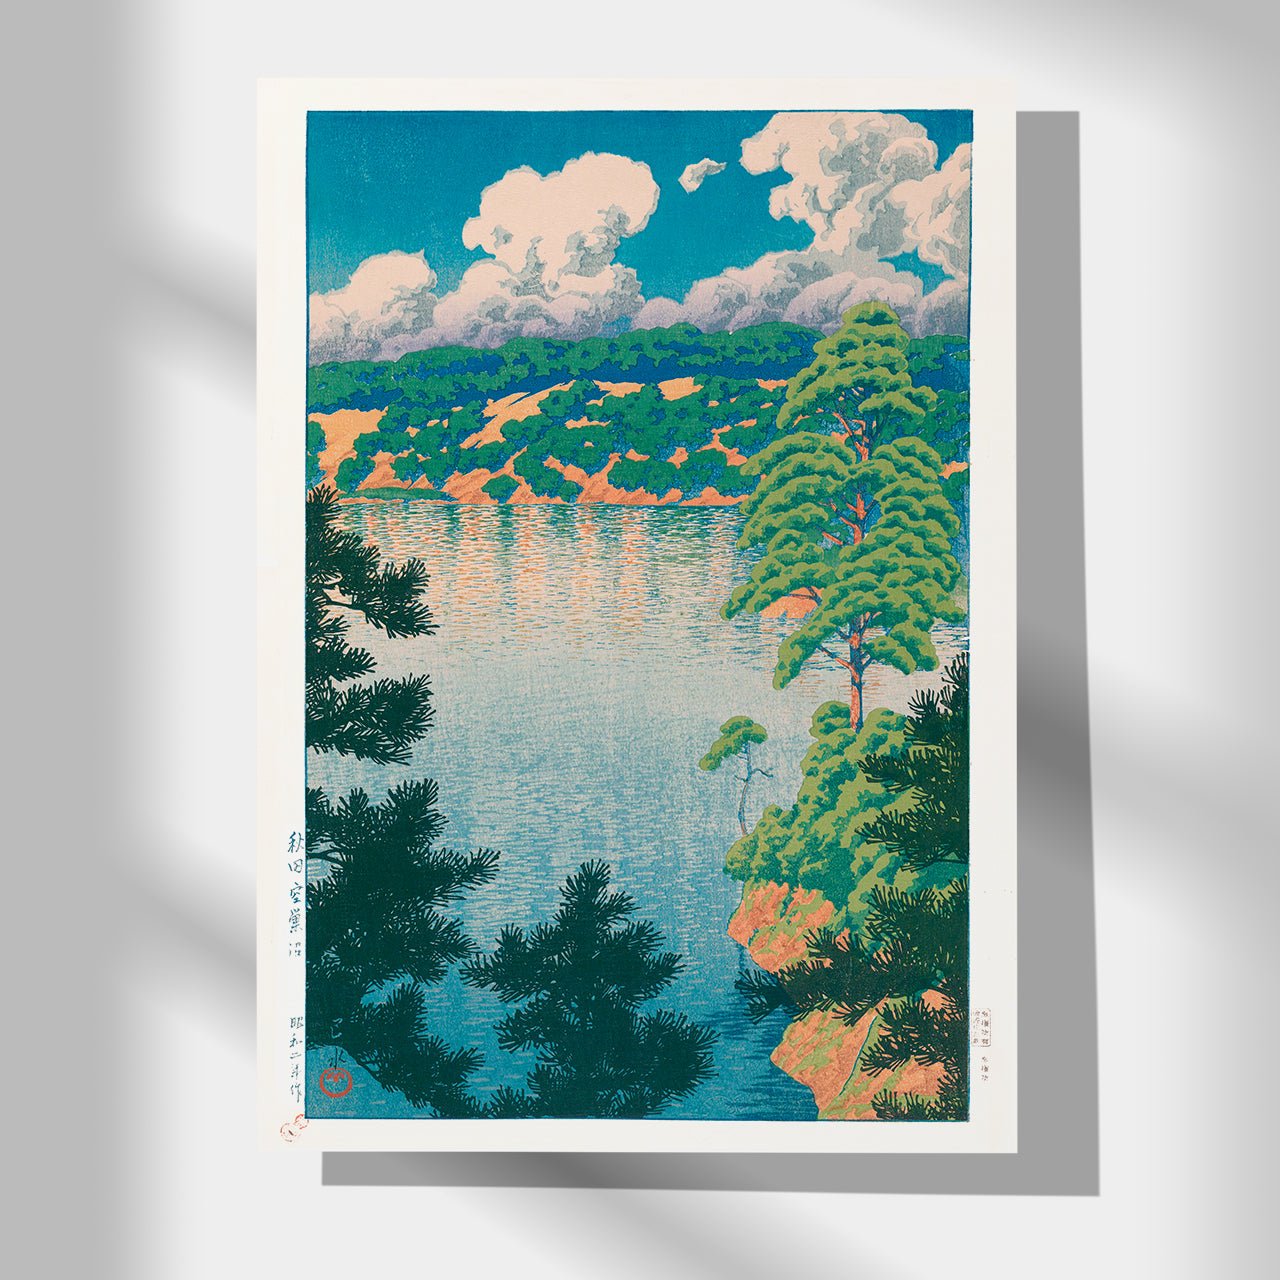 Japanese Art Poster by Kawase Hasui, featuring a serene lake surrounded by trees